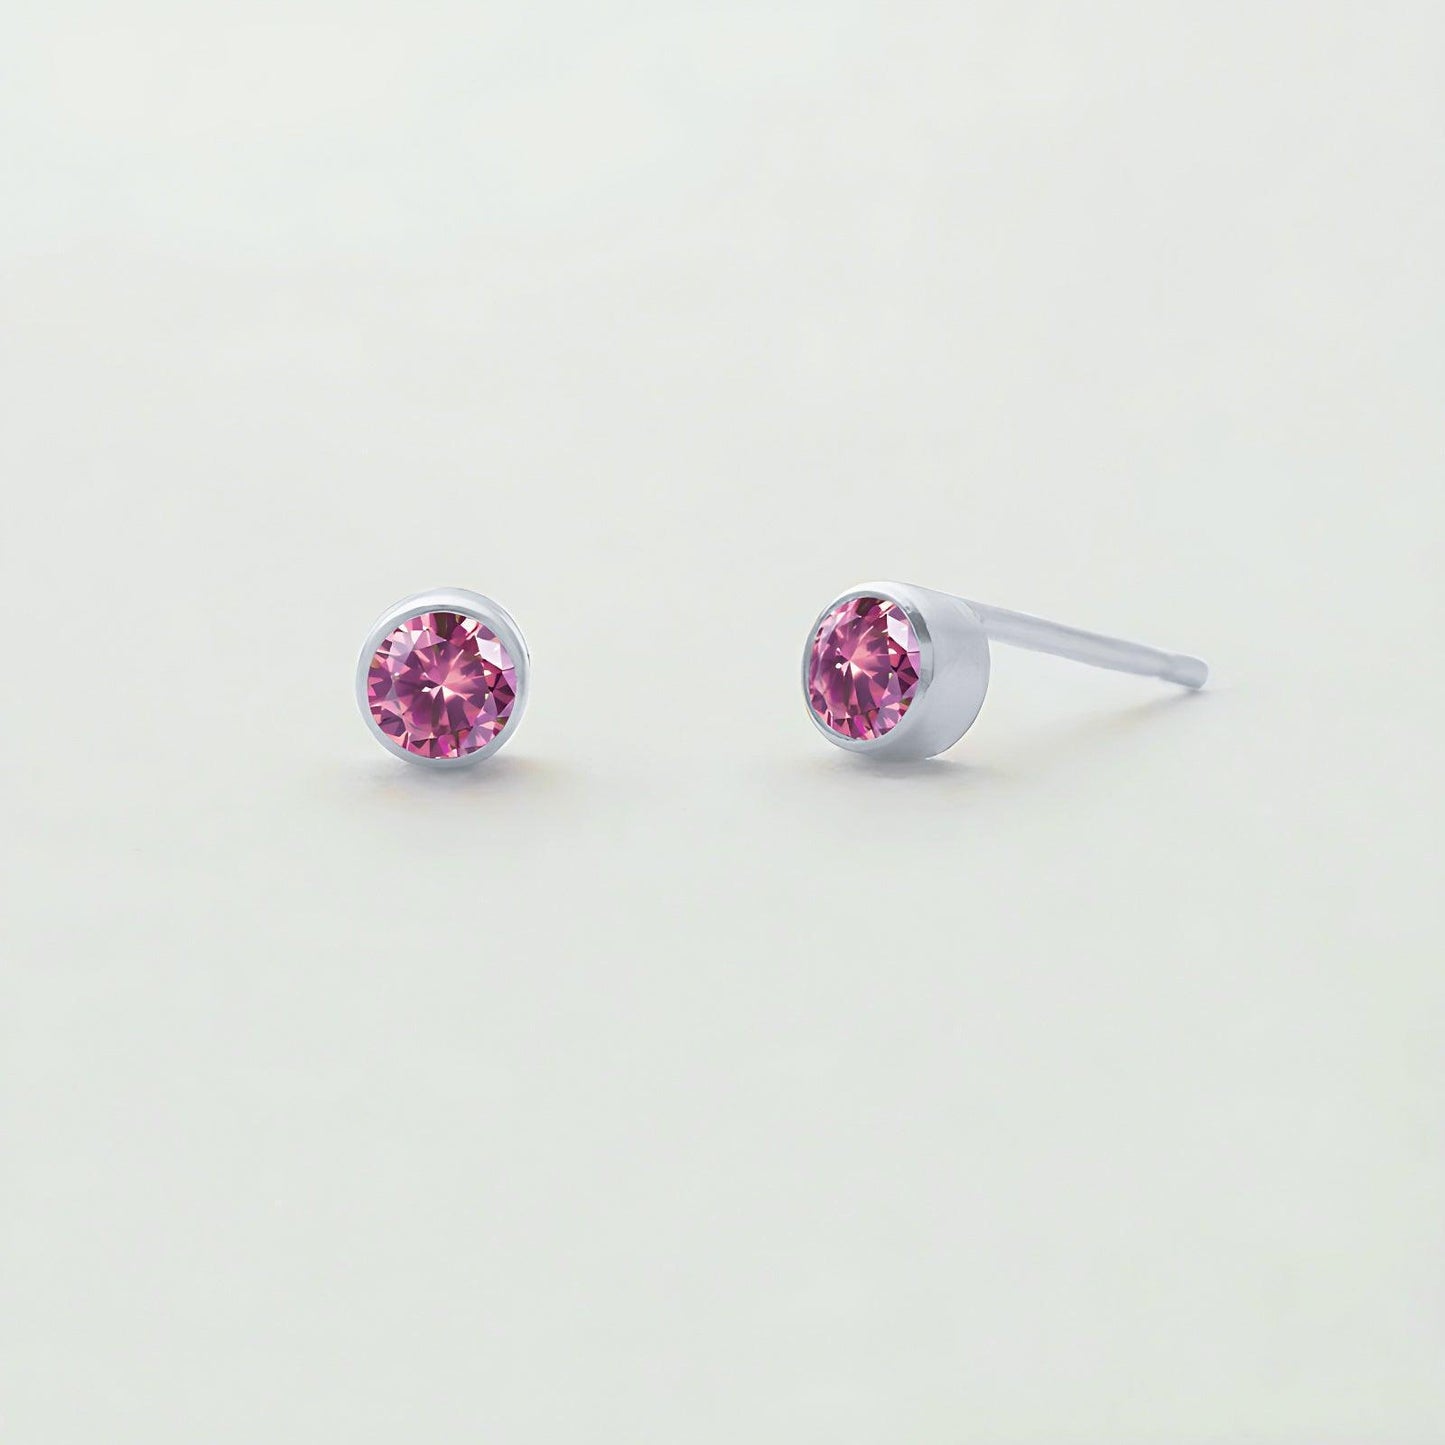 July Birthstone Cute Earrings in 2023 | July Birthstone Cute Earrings - undefined | birthstone earring, birthstone jewelry, Creative Cute Earrings, july birthstone, July birthstone is Ruby, June Birthstone Earrings | From Hunny Life | hunnylife.com